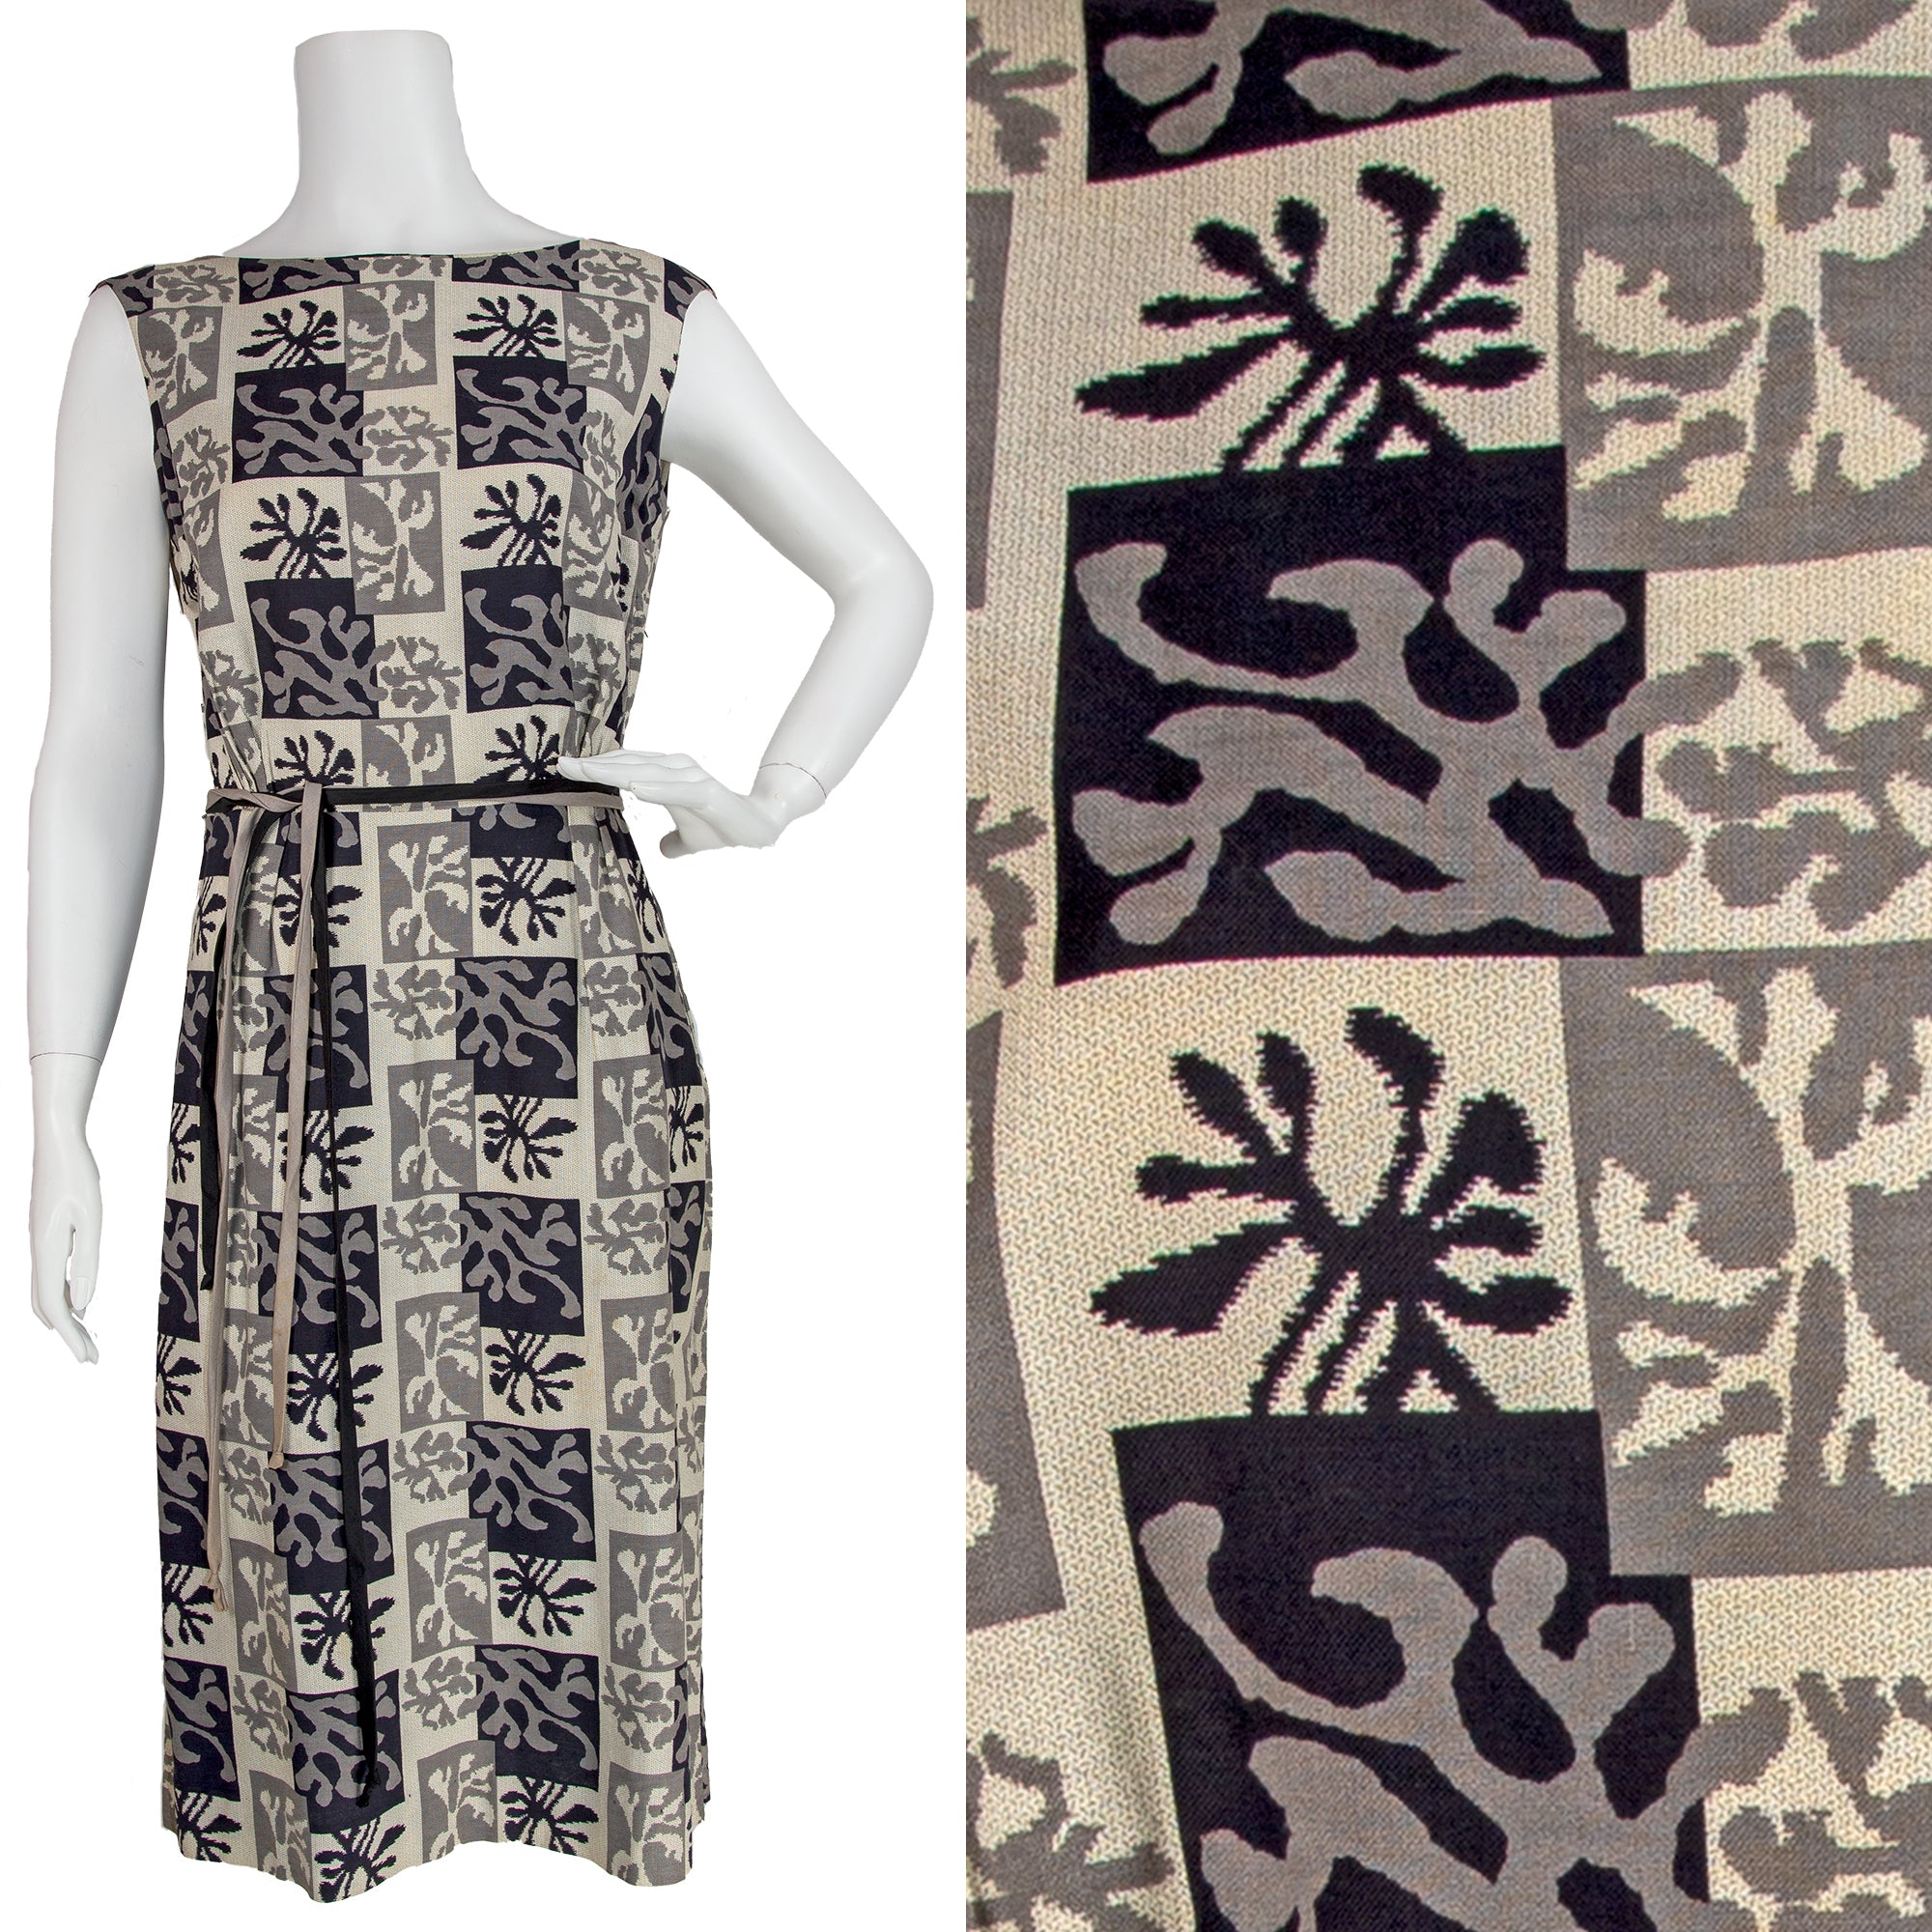 1960s Woven Cotton Sheath Dress with Matisse Print⁠